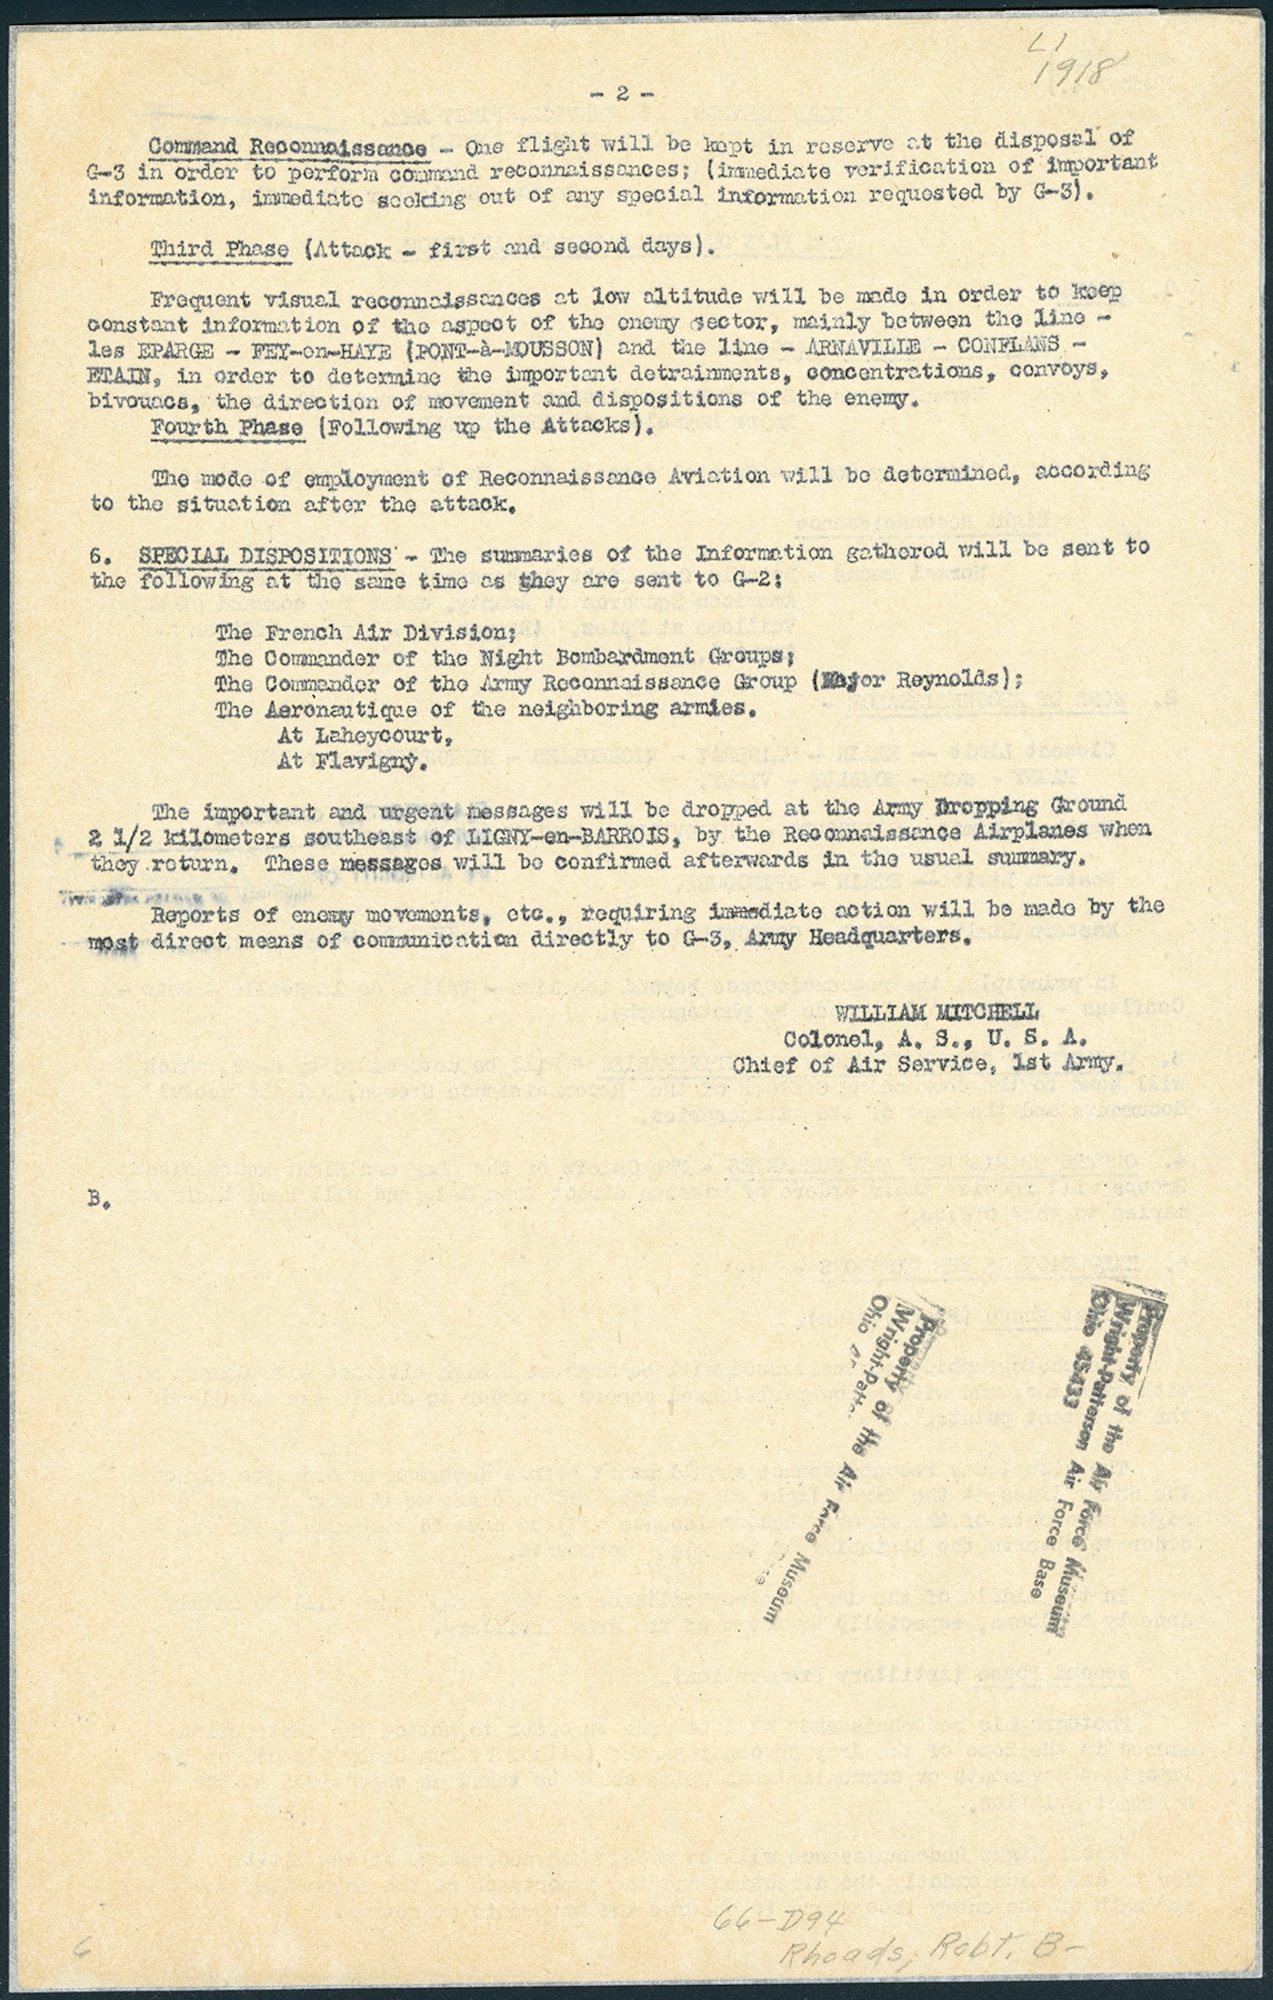 This battle plan, drafted by Col. William Mitchell, outlined the role of reconnaissance aviation in the planning and execution for the St. Mihiel Offensive. The plan identified the observation squadrons selected to participate in the offensive and established the boundaries of the operational zone. The reconnaissance plan was to be executed in three phases. (U.S. Air Force photo)